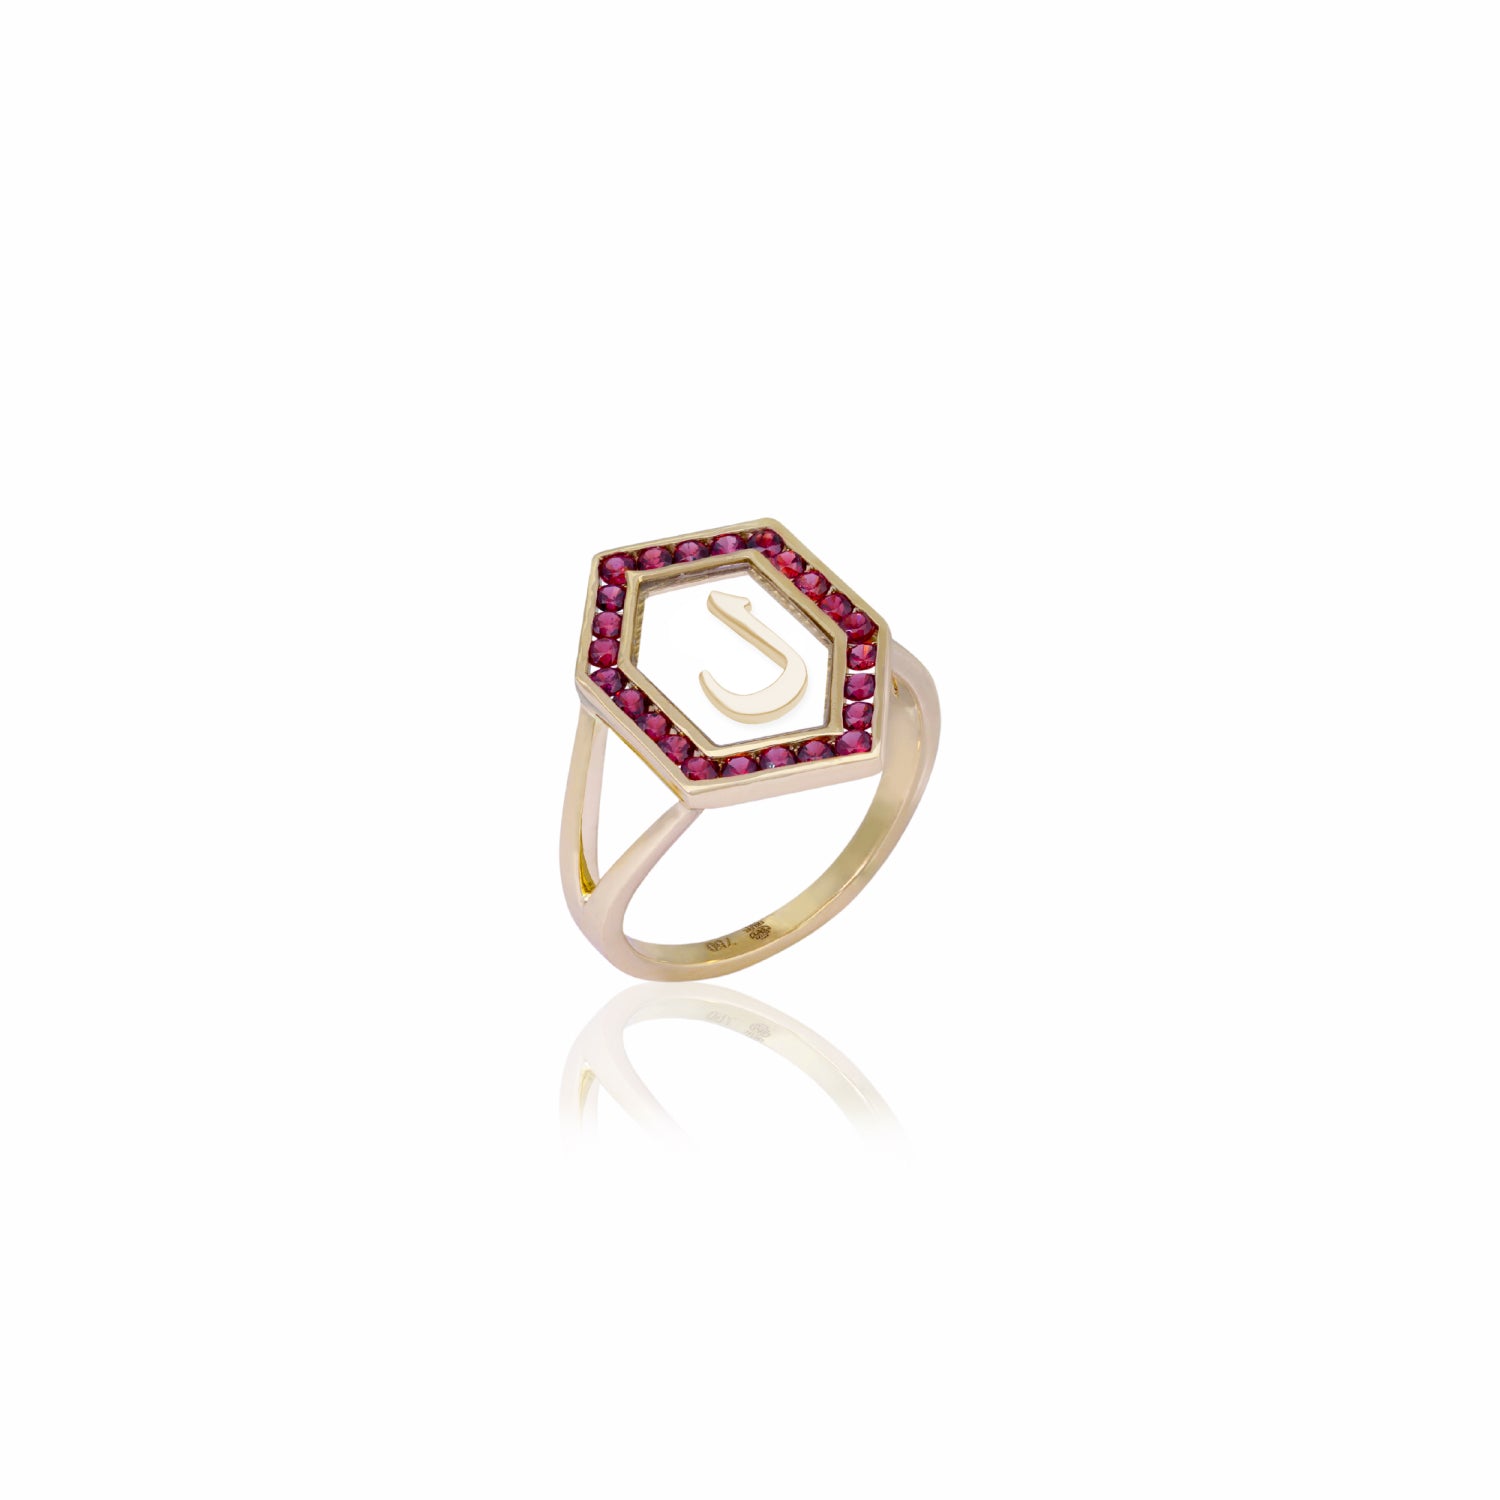 Qamoos 1.0 Letter ل Ruby Ring in Yellow Gold